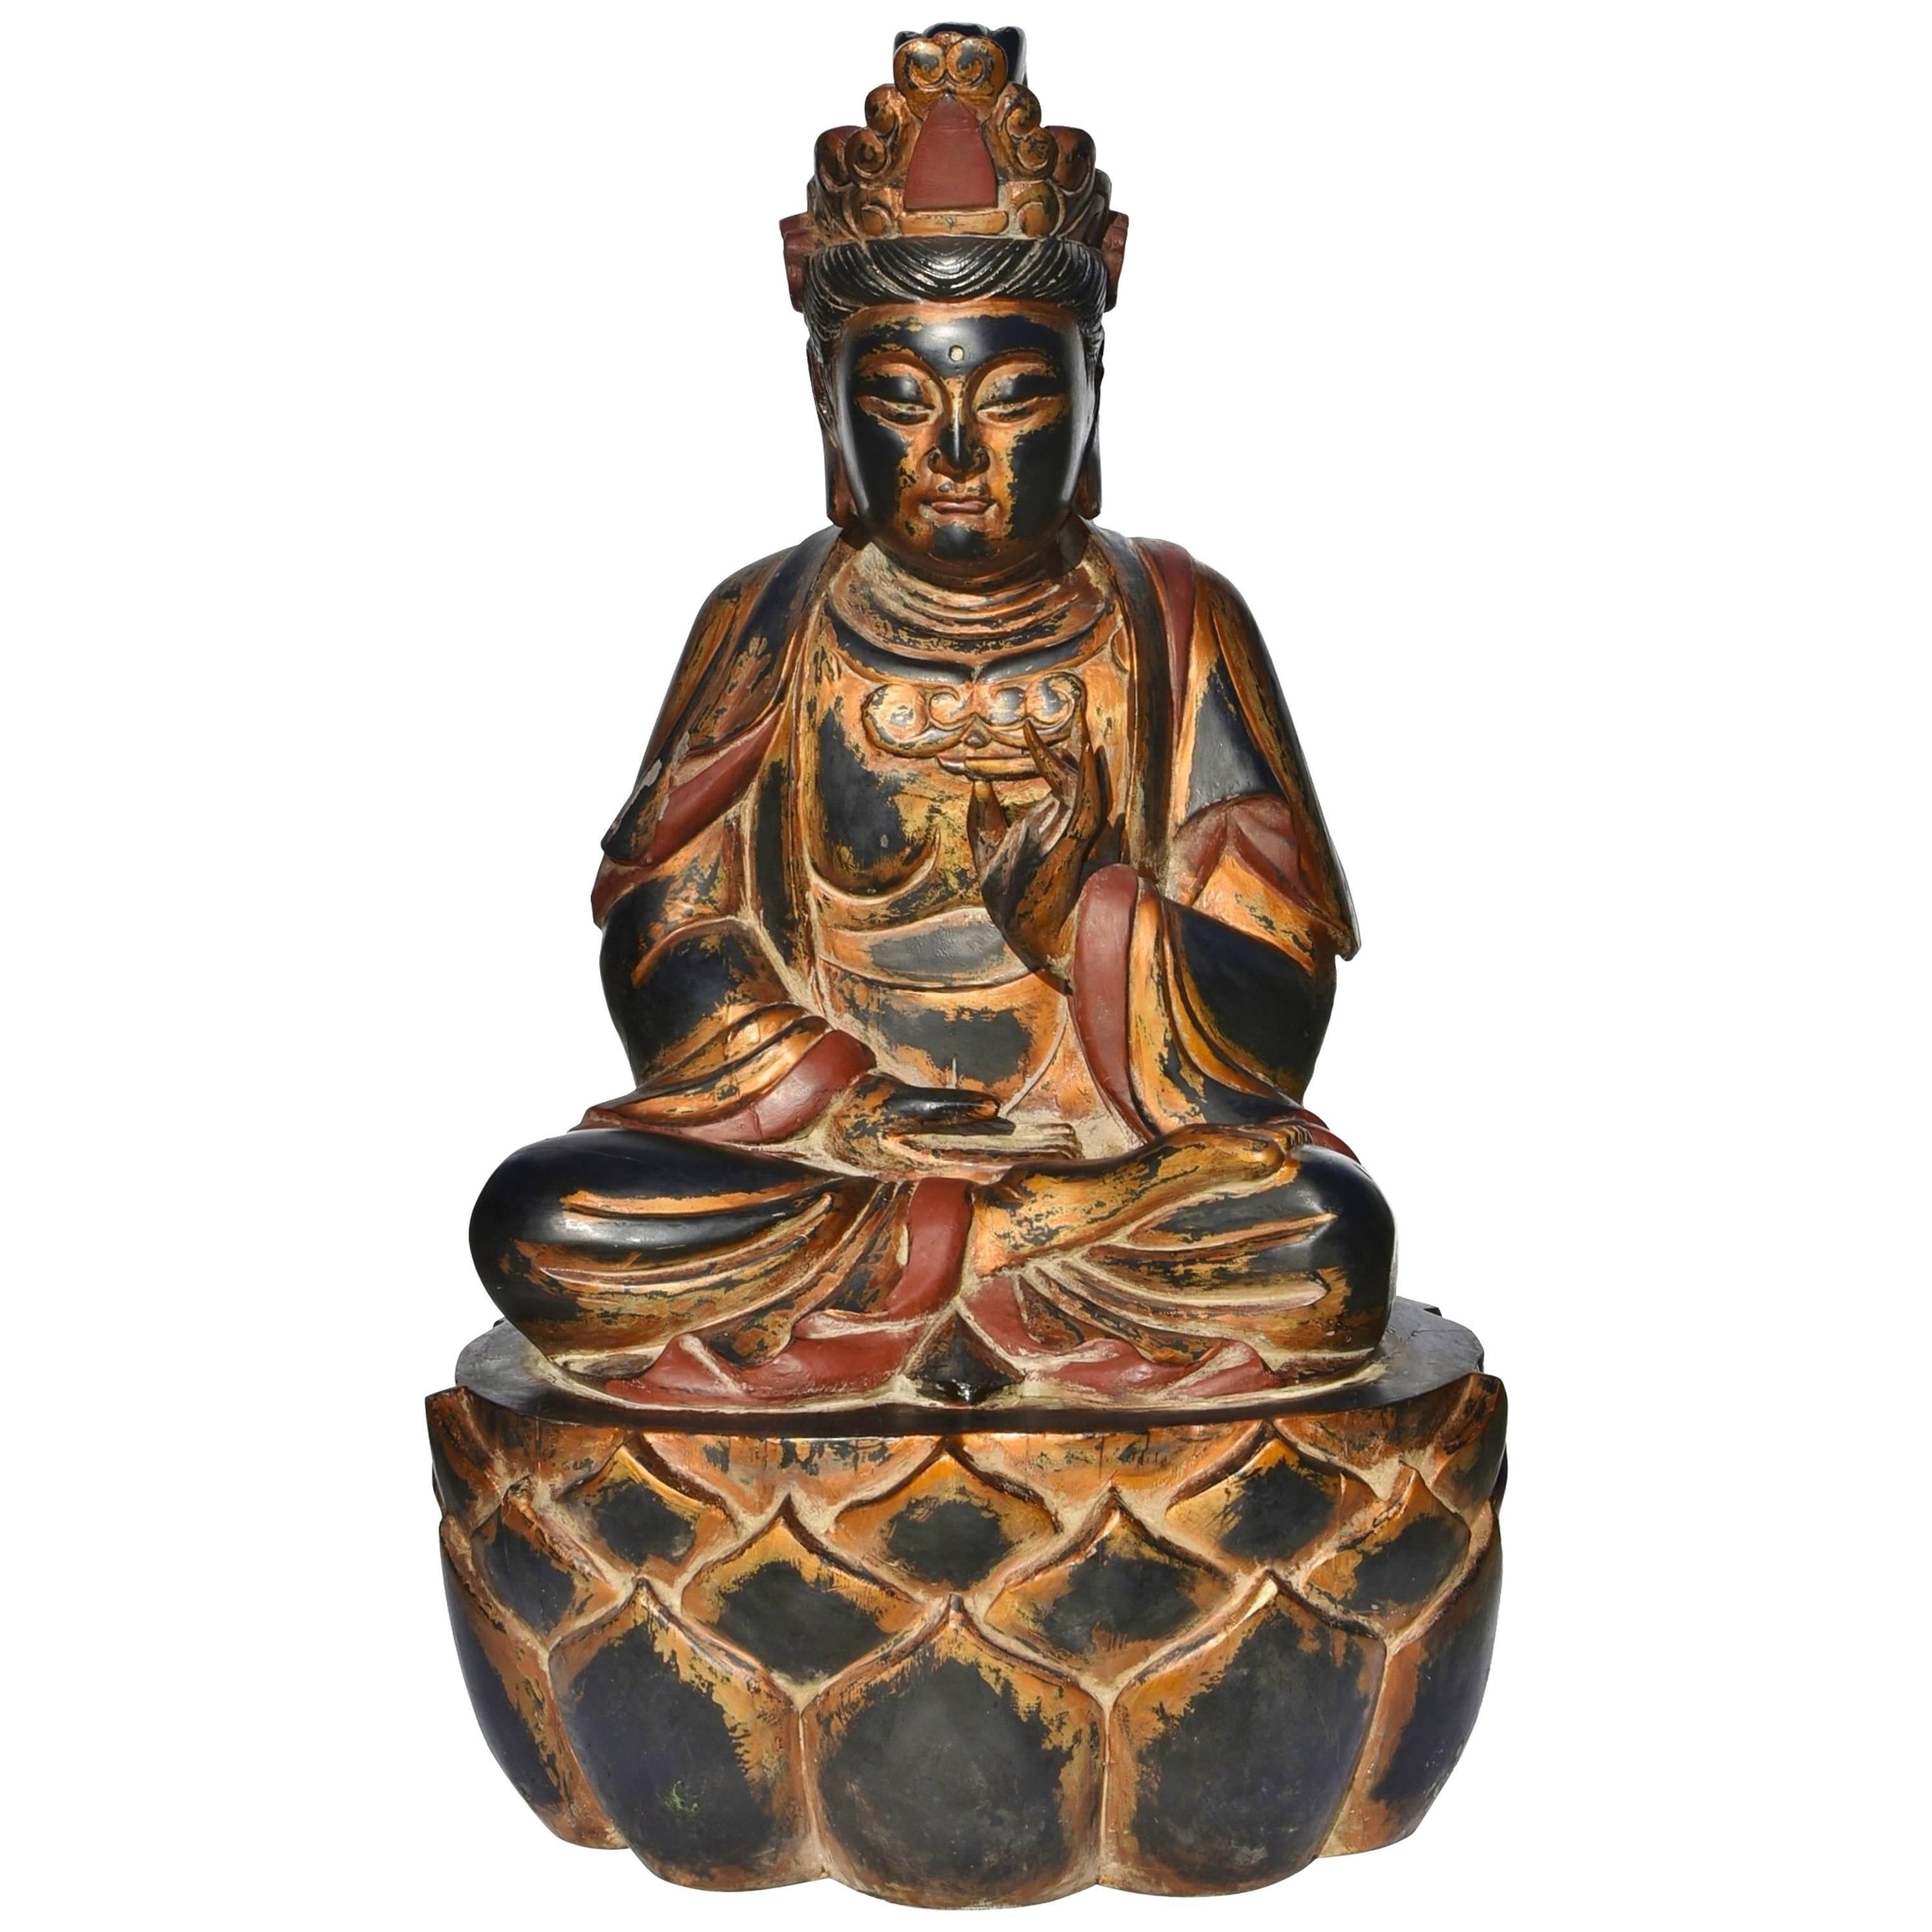 Huge Wooden Gilded Buddha Statue, Hand-Painted